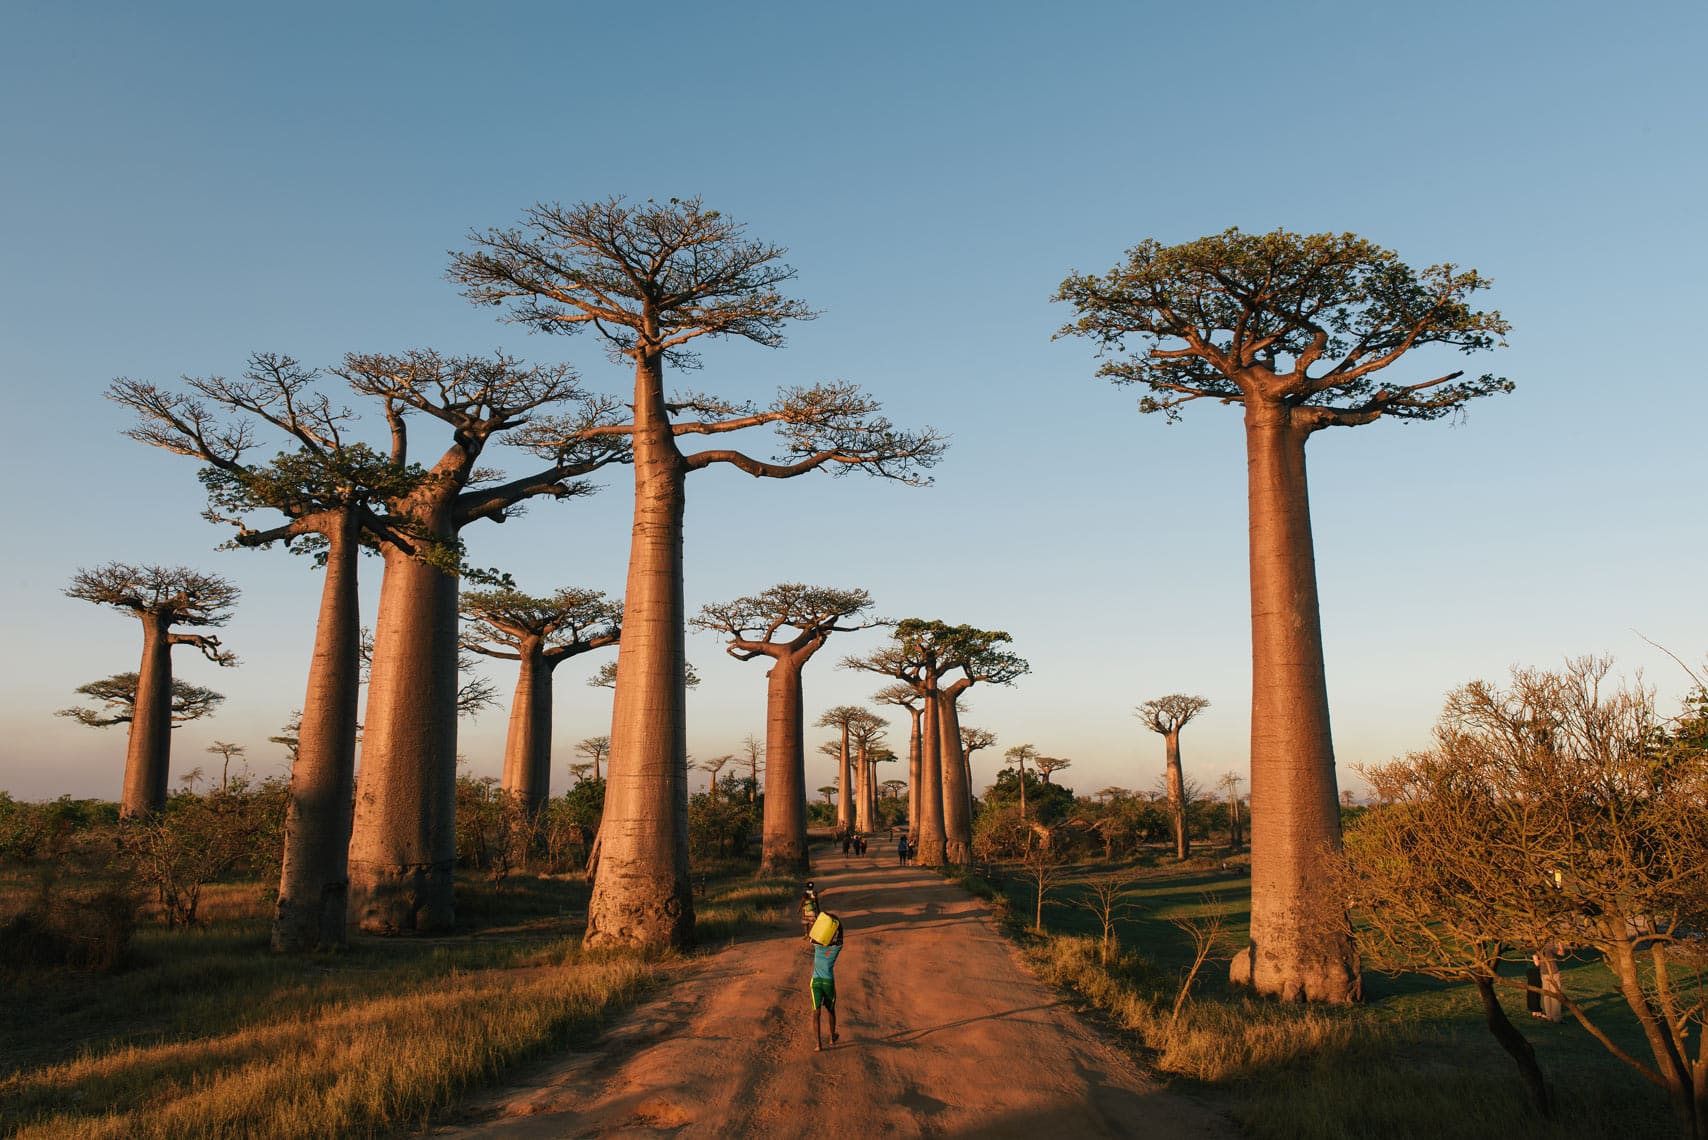 Things to do in Madagascar: Marvel at Sunset on the Avenue of the Baobabs